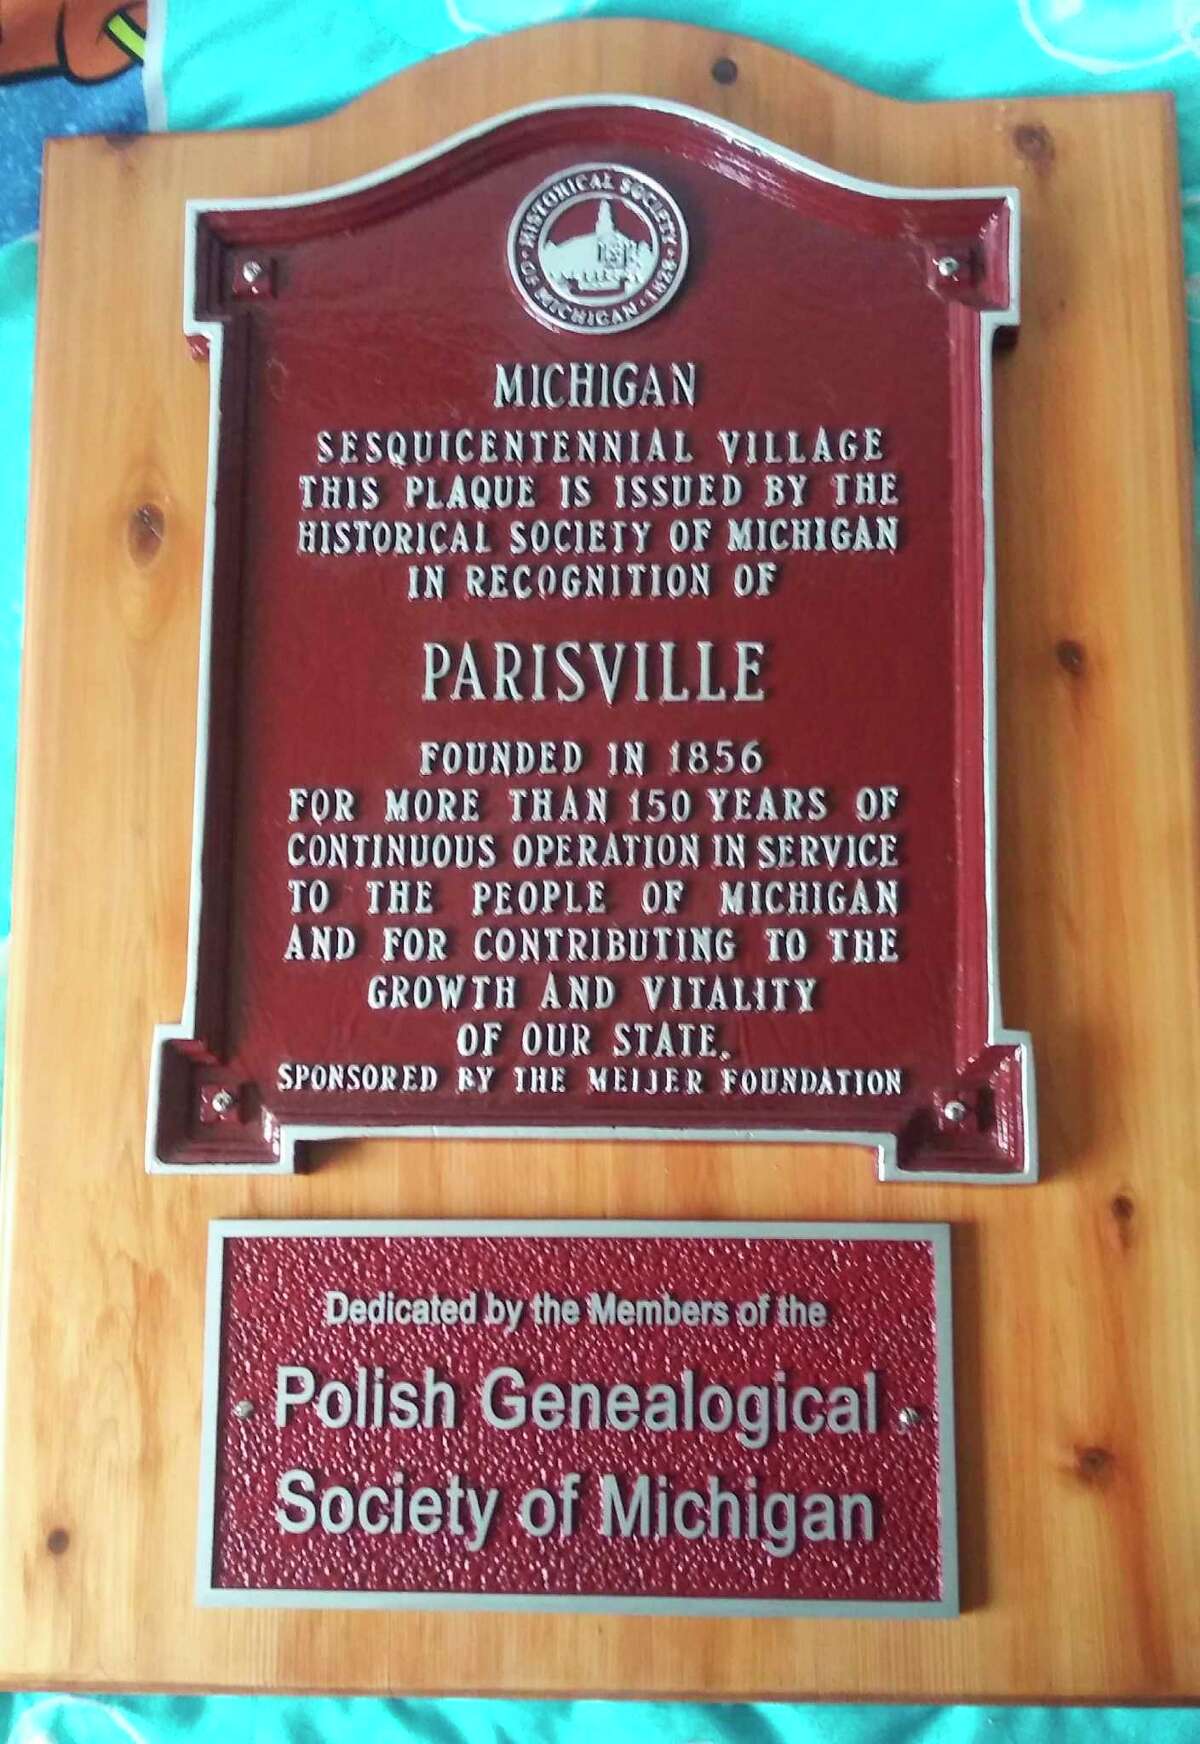 The plaque that will be placed in Parisville on June 5. (Roger Laske/Courtesy Photo)